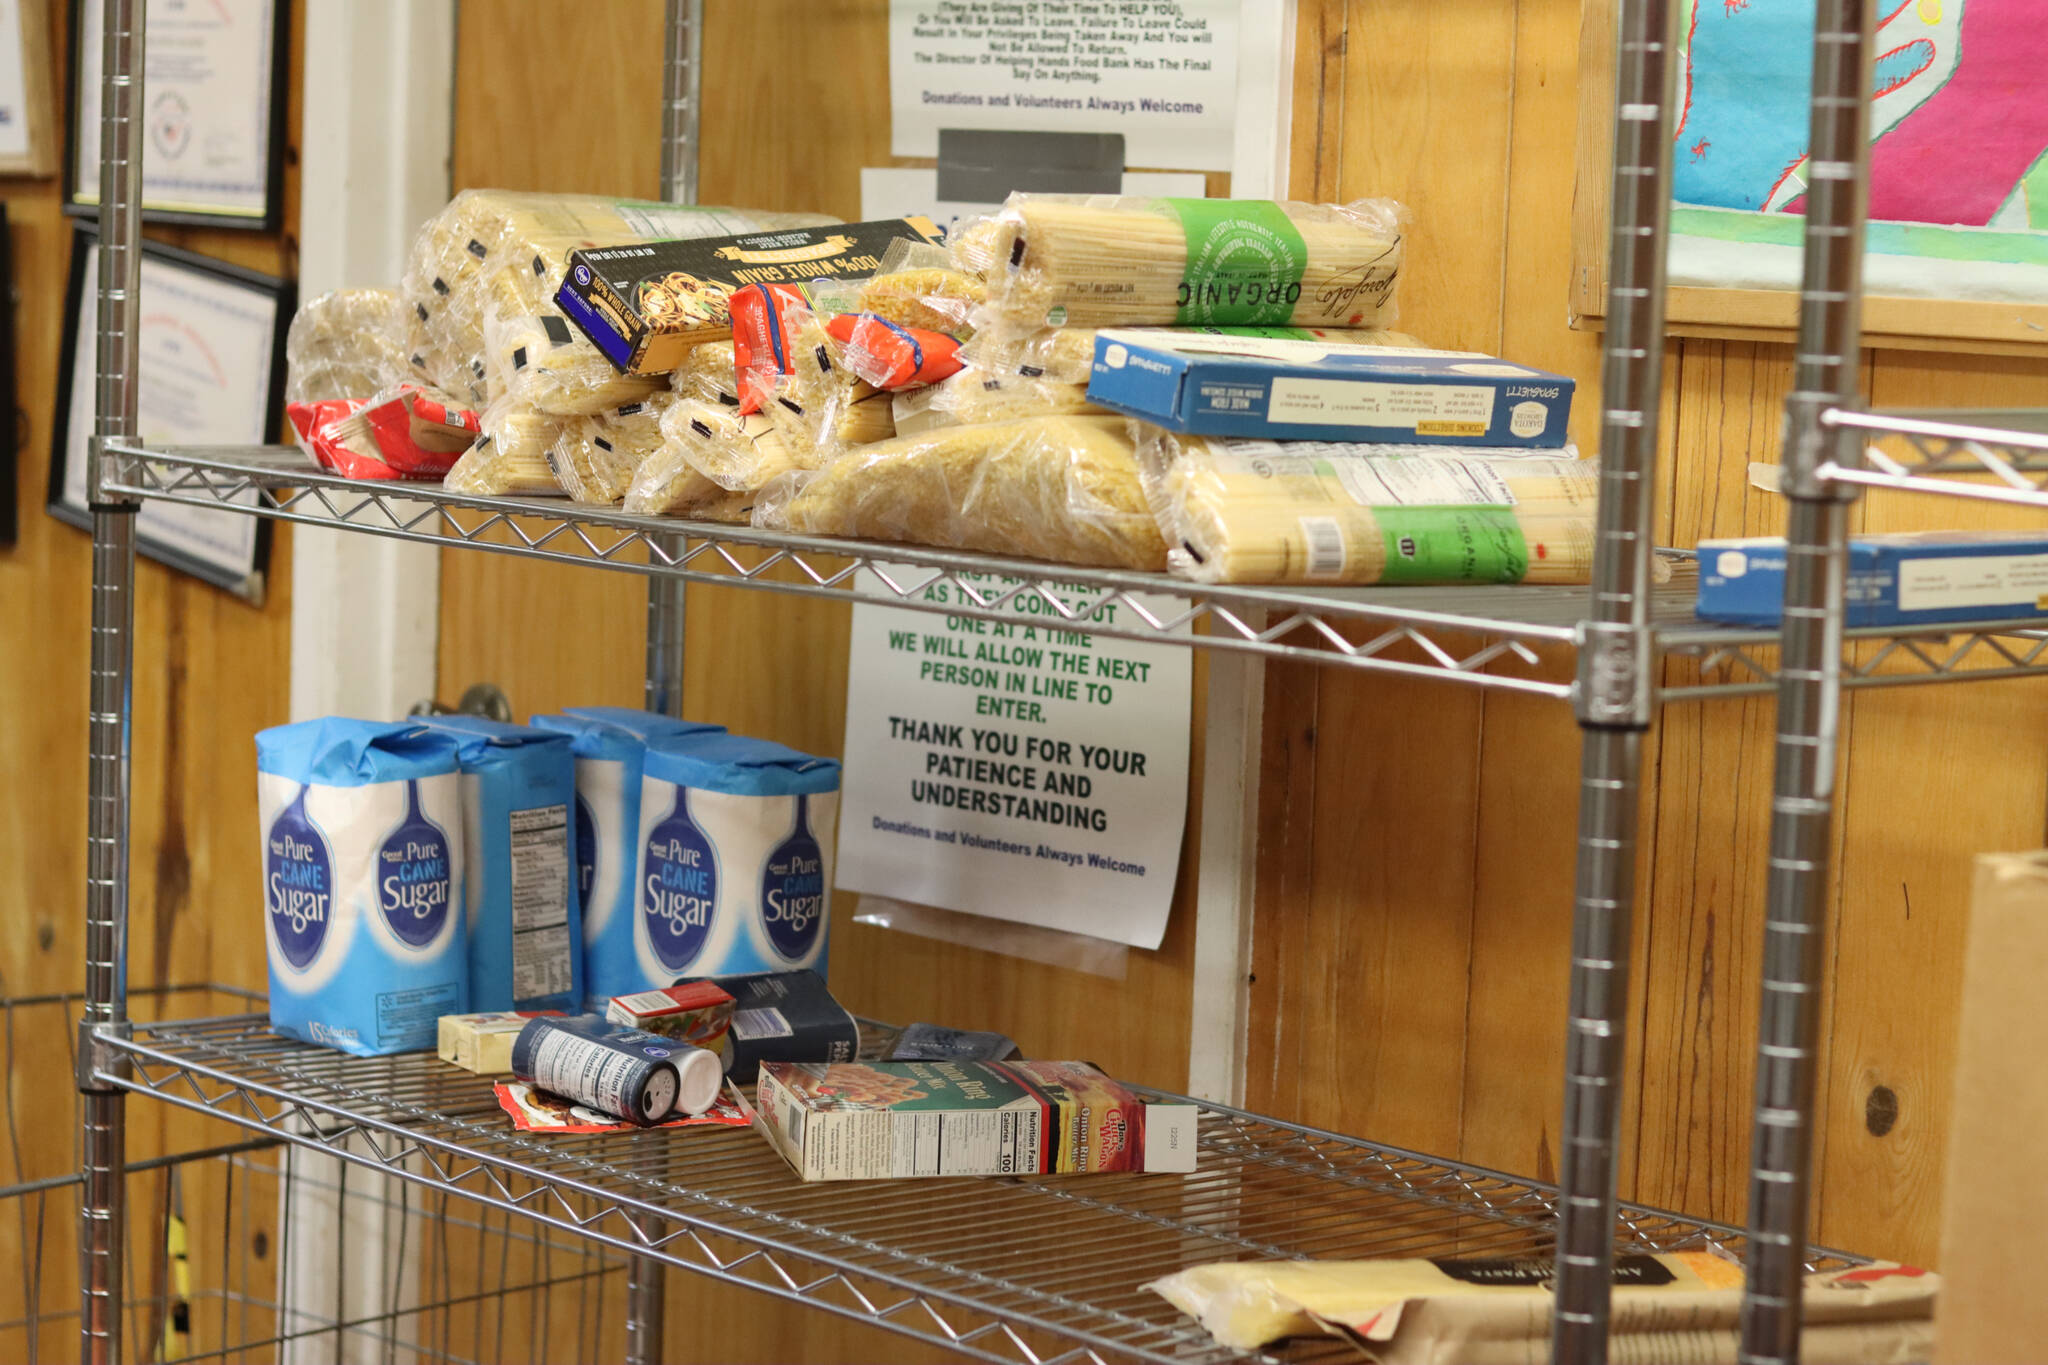 The Helping Hands Food Bank was forced to close doors over the weekend after serving the Juneau community for 39 years. Pantry director Karen Fortwengler said they’ll be placing any remaining food outside their doors throughout the week for anyone to pick up. (Jonson Kuhn / Juneau Empire)